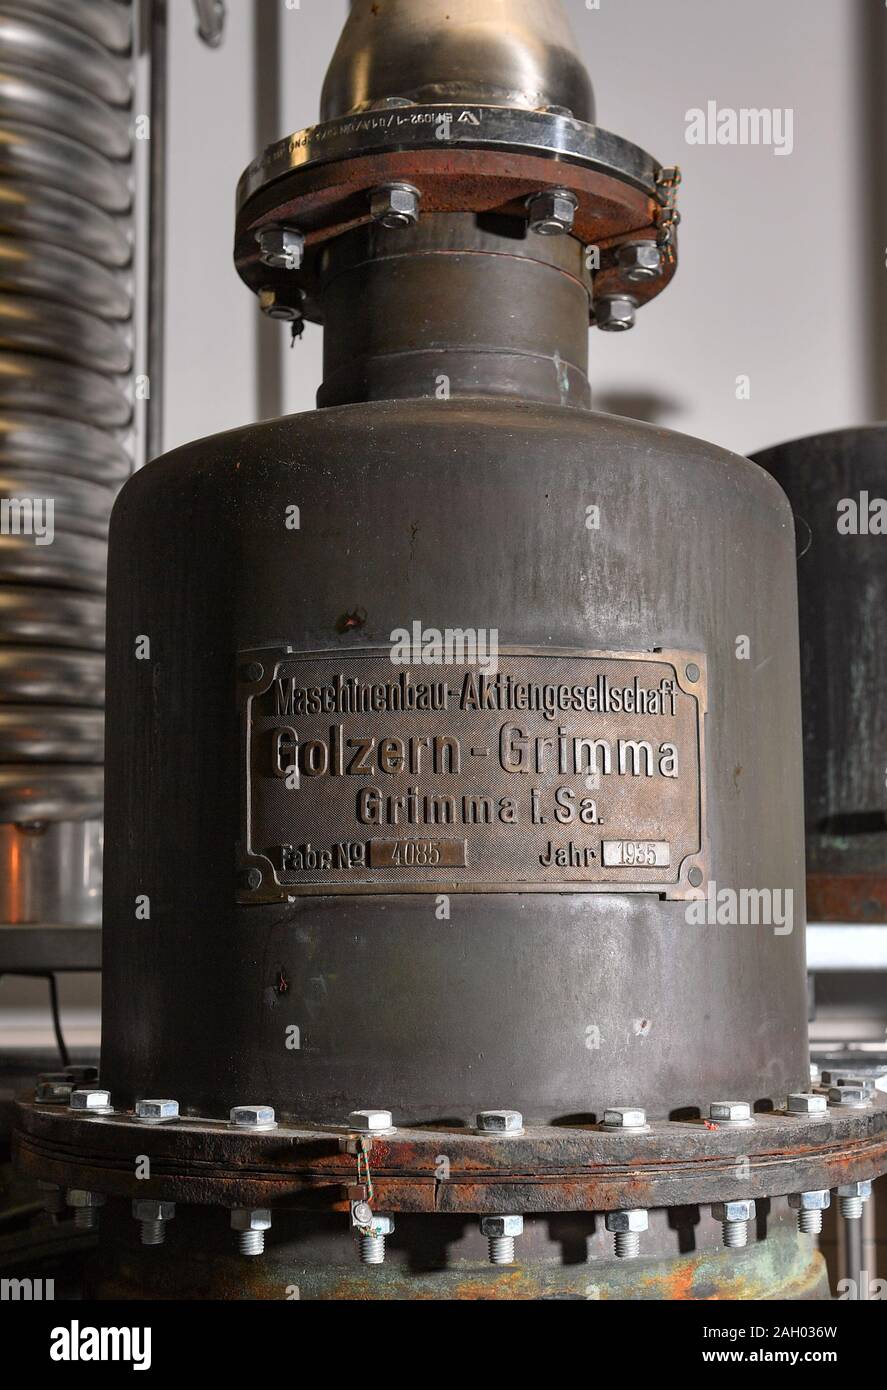 16 December 2019, Saxony-Anhalt, Zeitz: View of Germany's oldest whisky distillery bubble from 1935, which originates from the mechanical engineering company Golzern-Grimma. Now the apparatus is the heart of the Zeitzer Whisky Manufacture. It was first used in 1950 in Luckenwalde, Brandenburg, by the company C.W. Falckenthal Söhne. Since April, the historic still has been running again several times a month. The manufactory in Zeitz distils around 22000 litres of pure alcohol per year. New barrels are regularly added to the warehouse, and a maximum of one barrel per month is bottled. At the mo Stock Photo